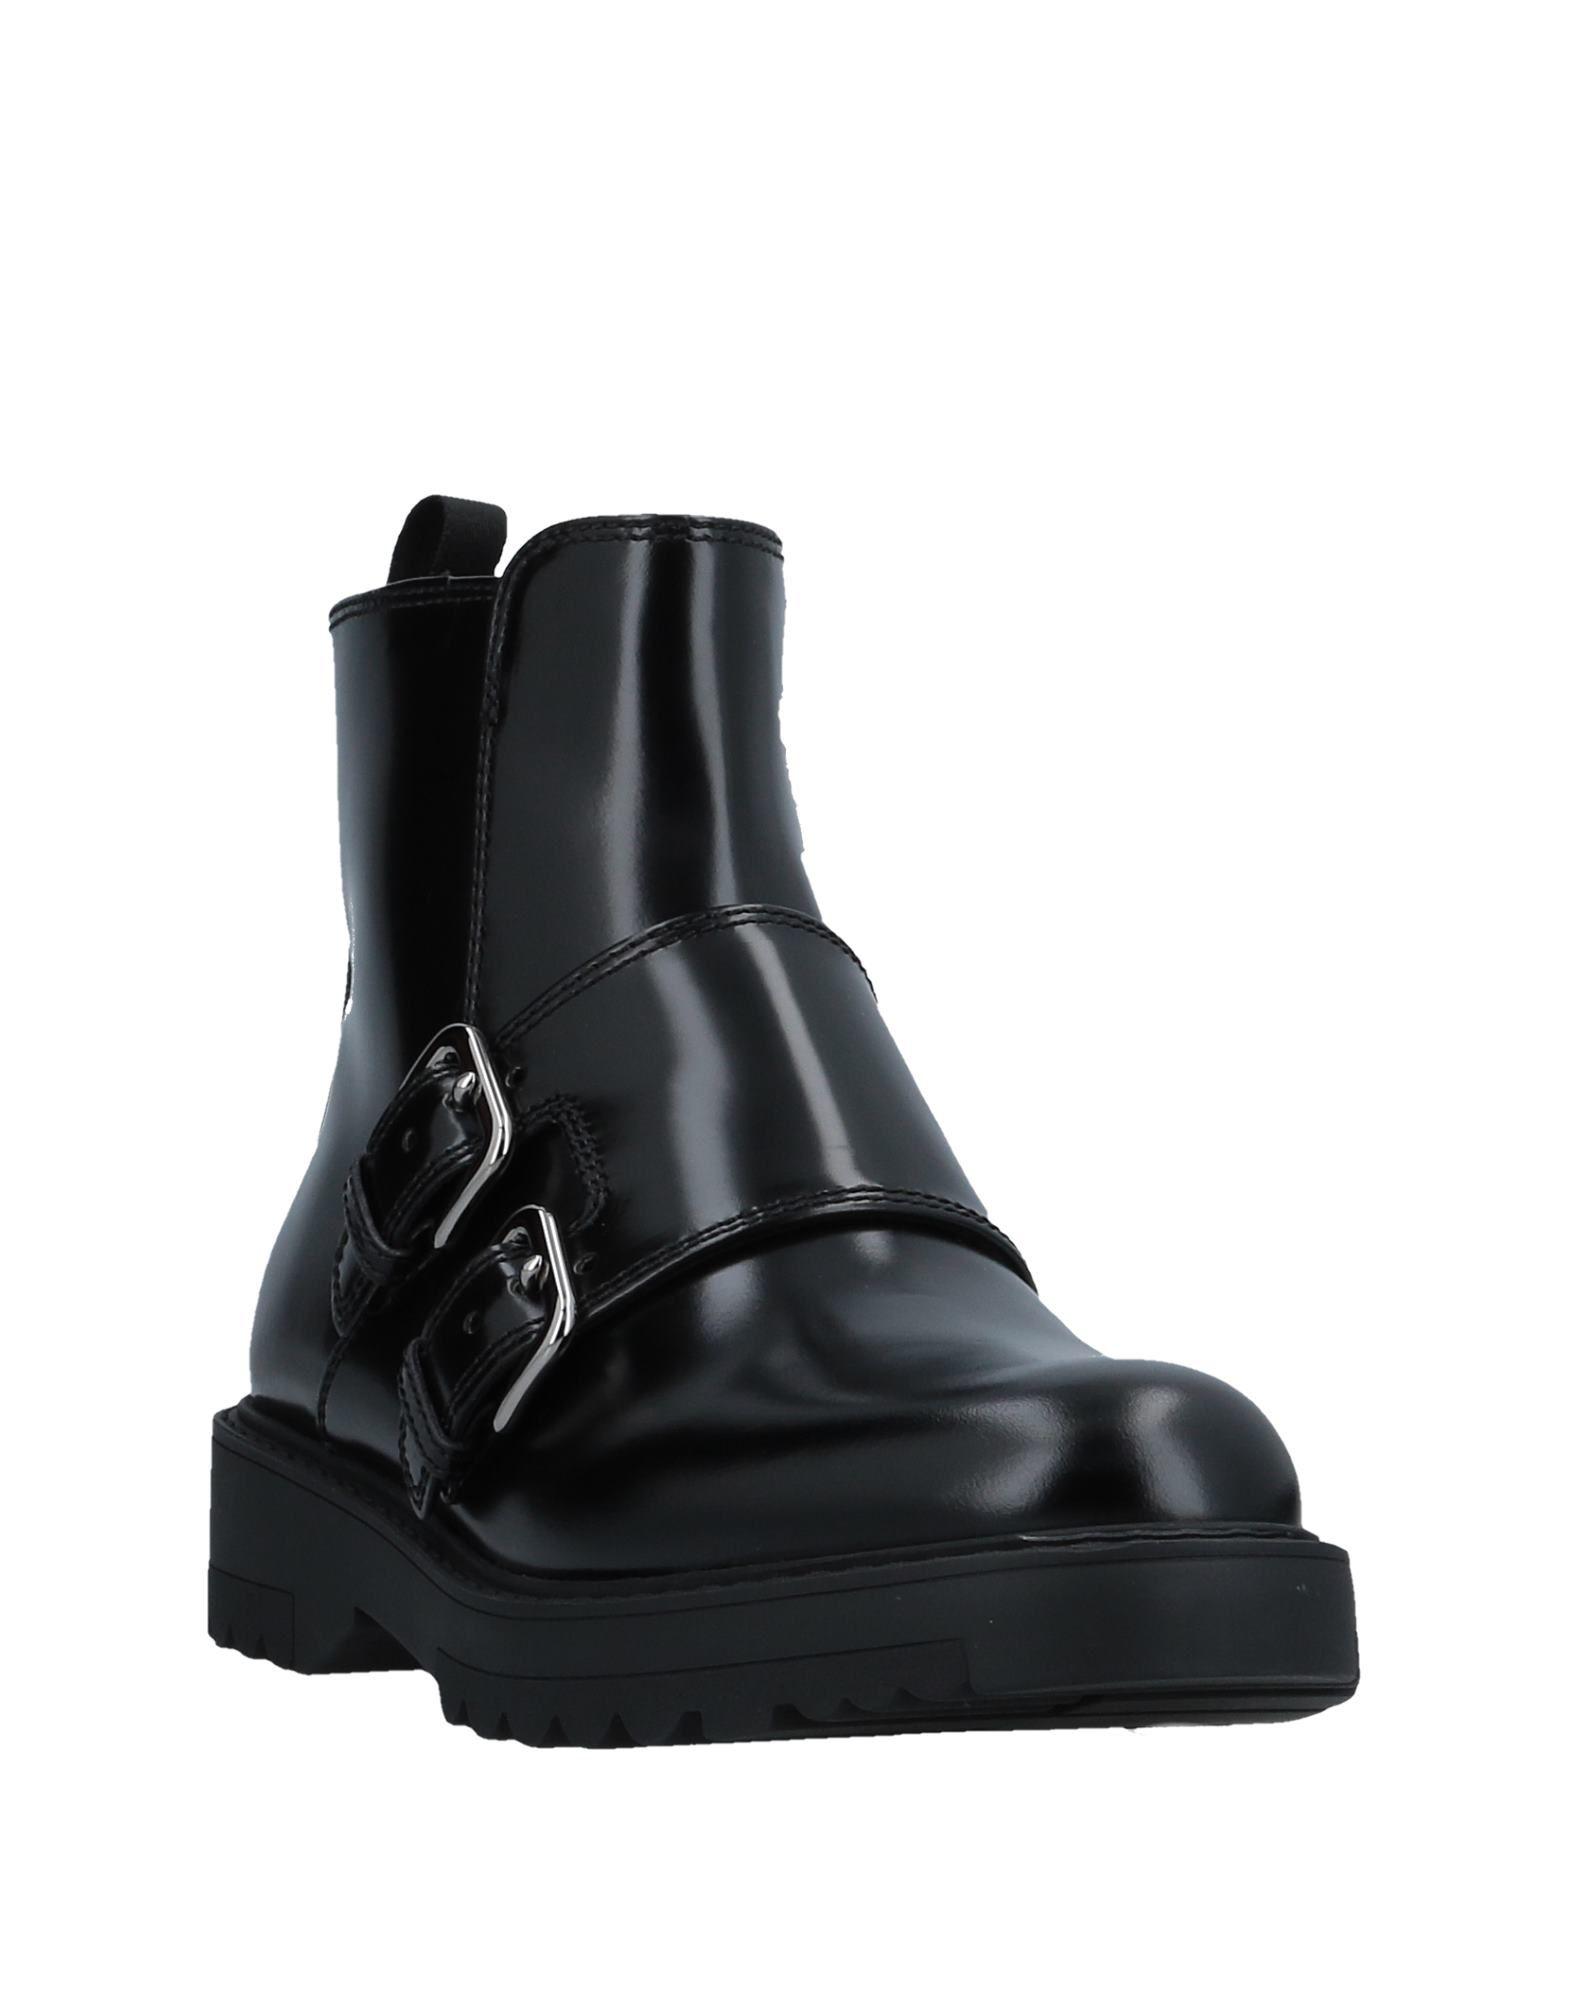 Prada Leather Ankle Boots in Black - Lyst